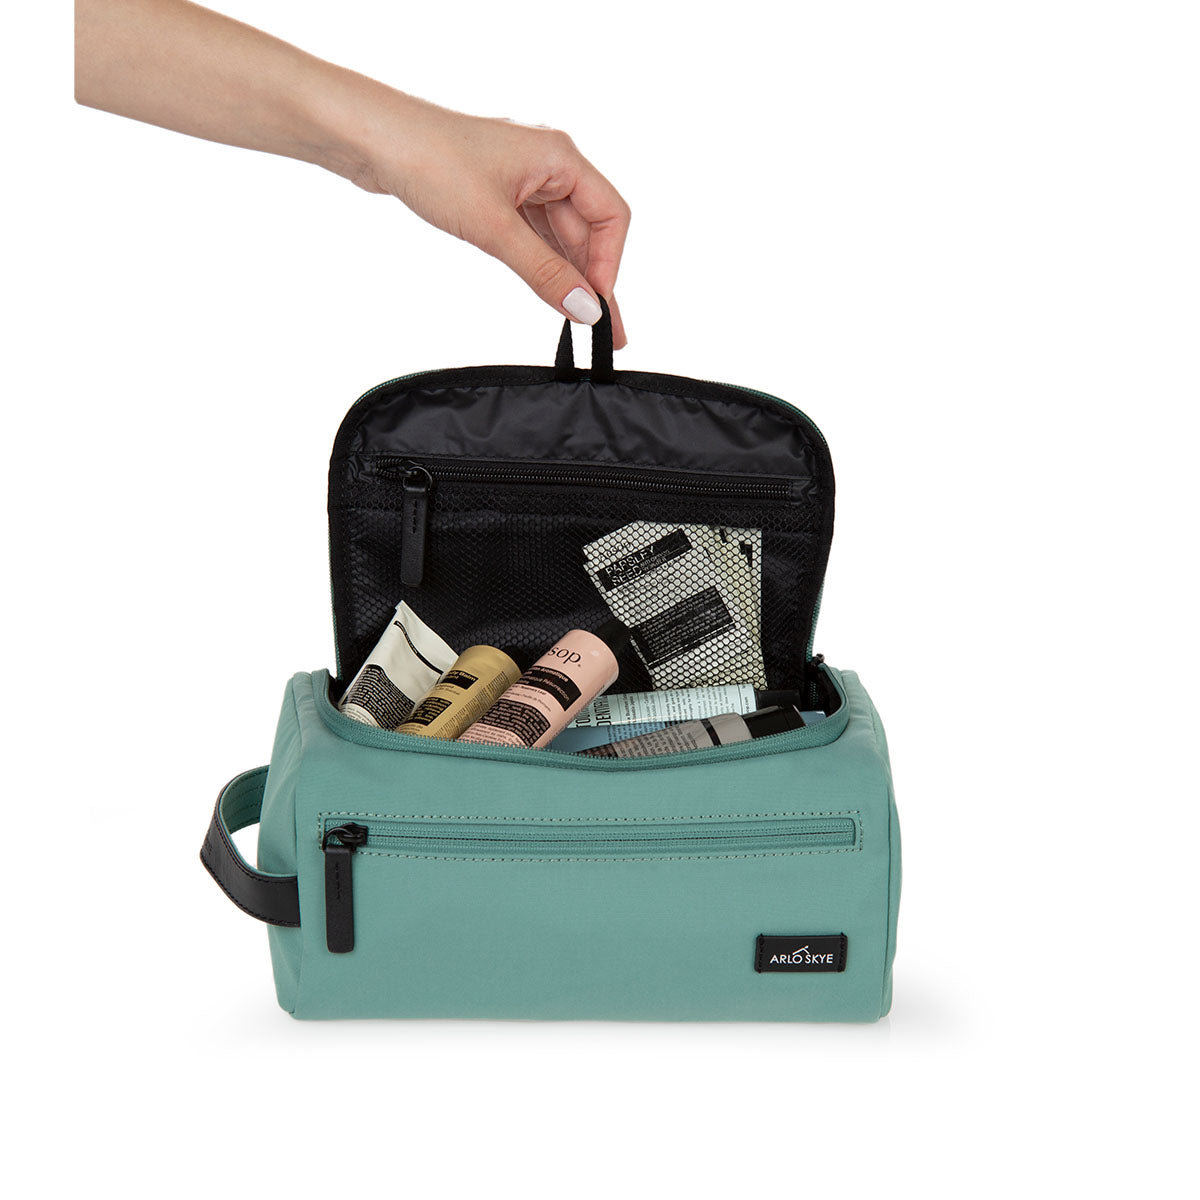 toiletry bag in mint color showing interior view.